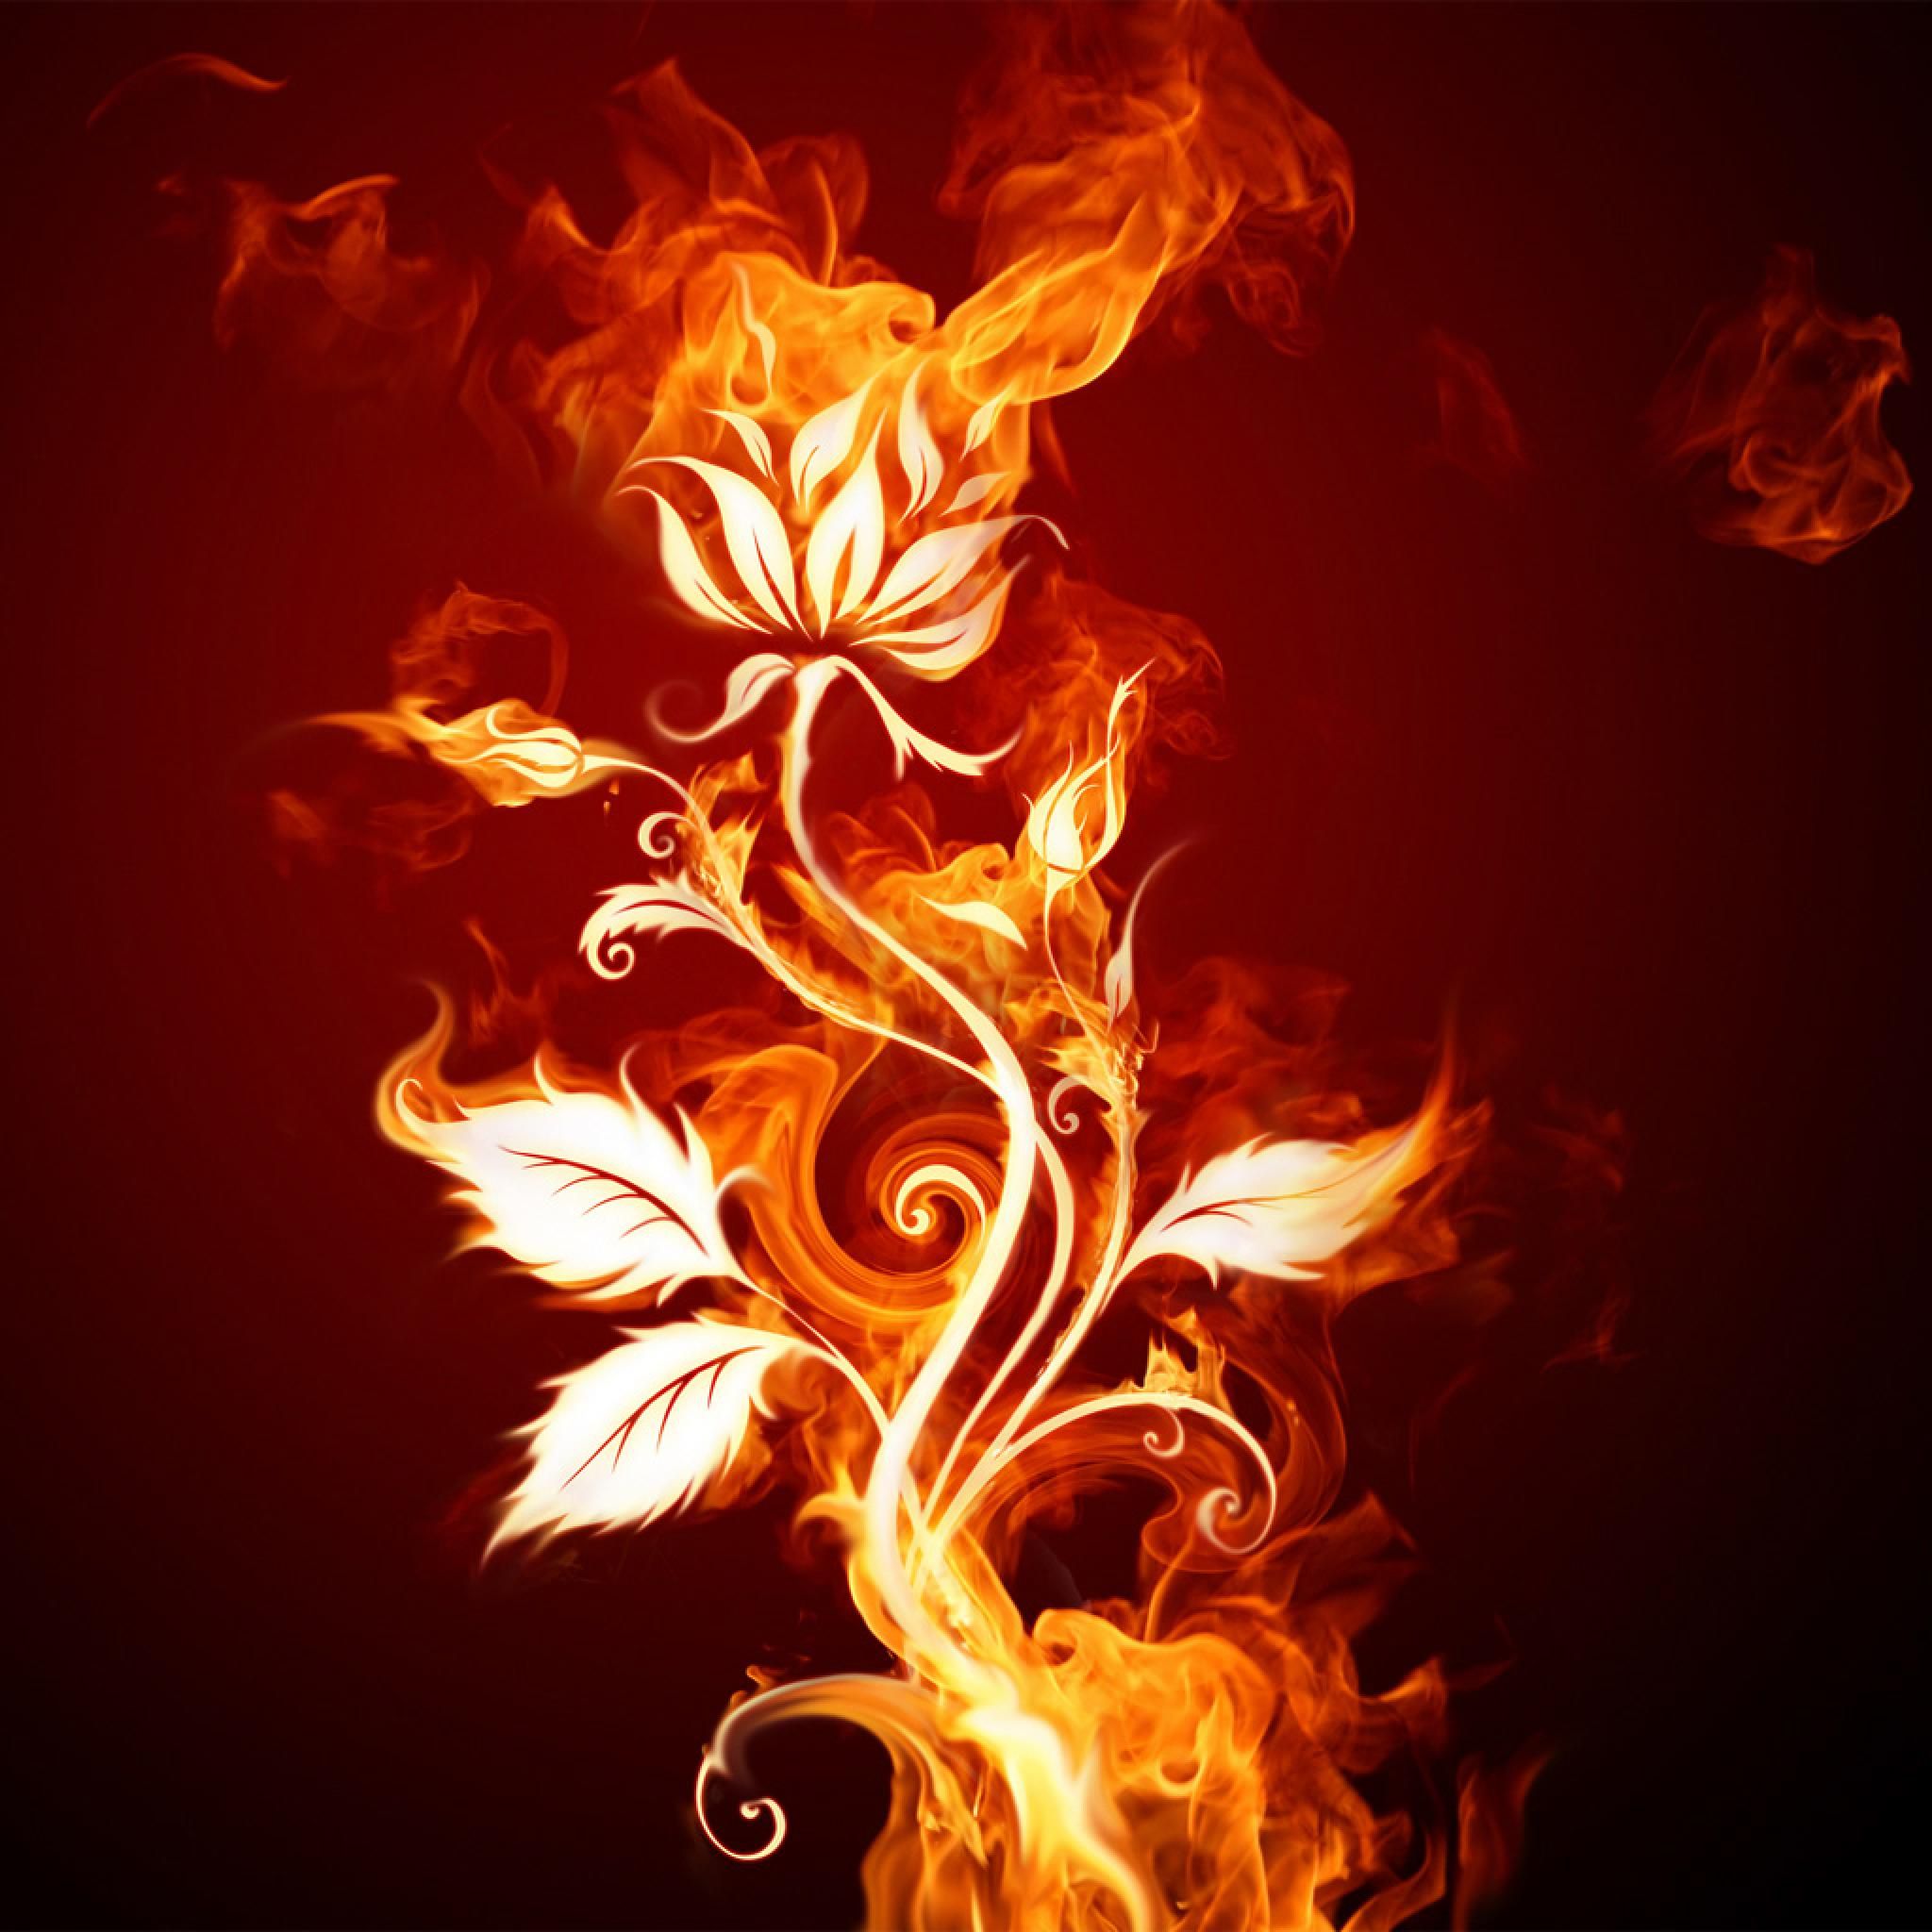 Rose On Fire Wallpapers - Wallpaper Cave